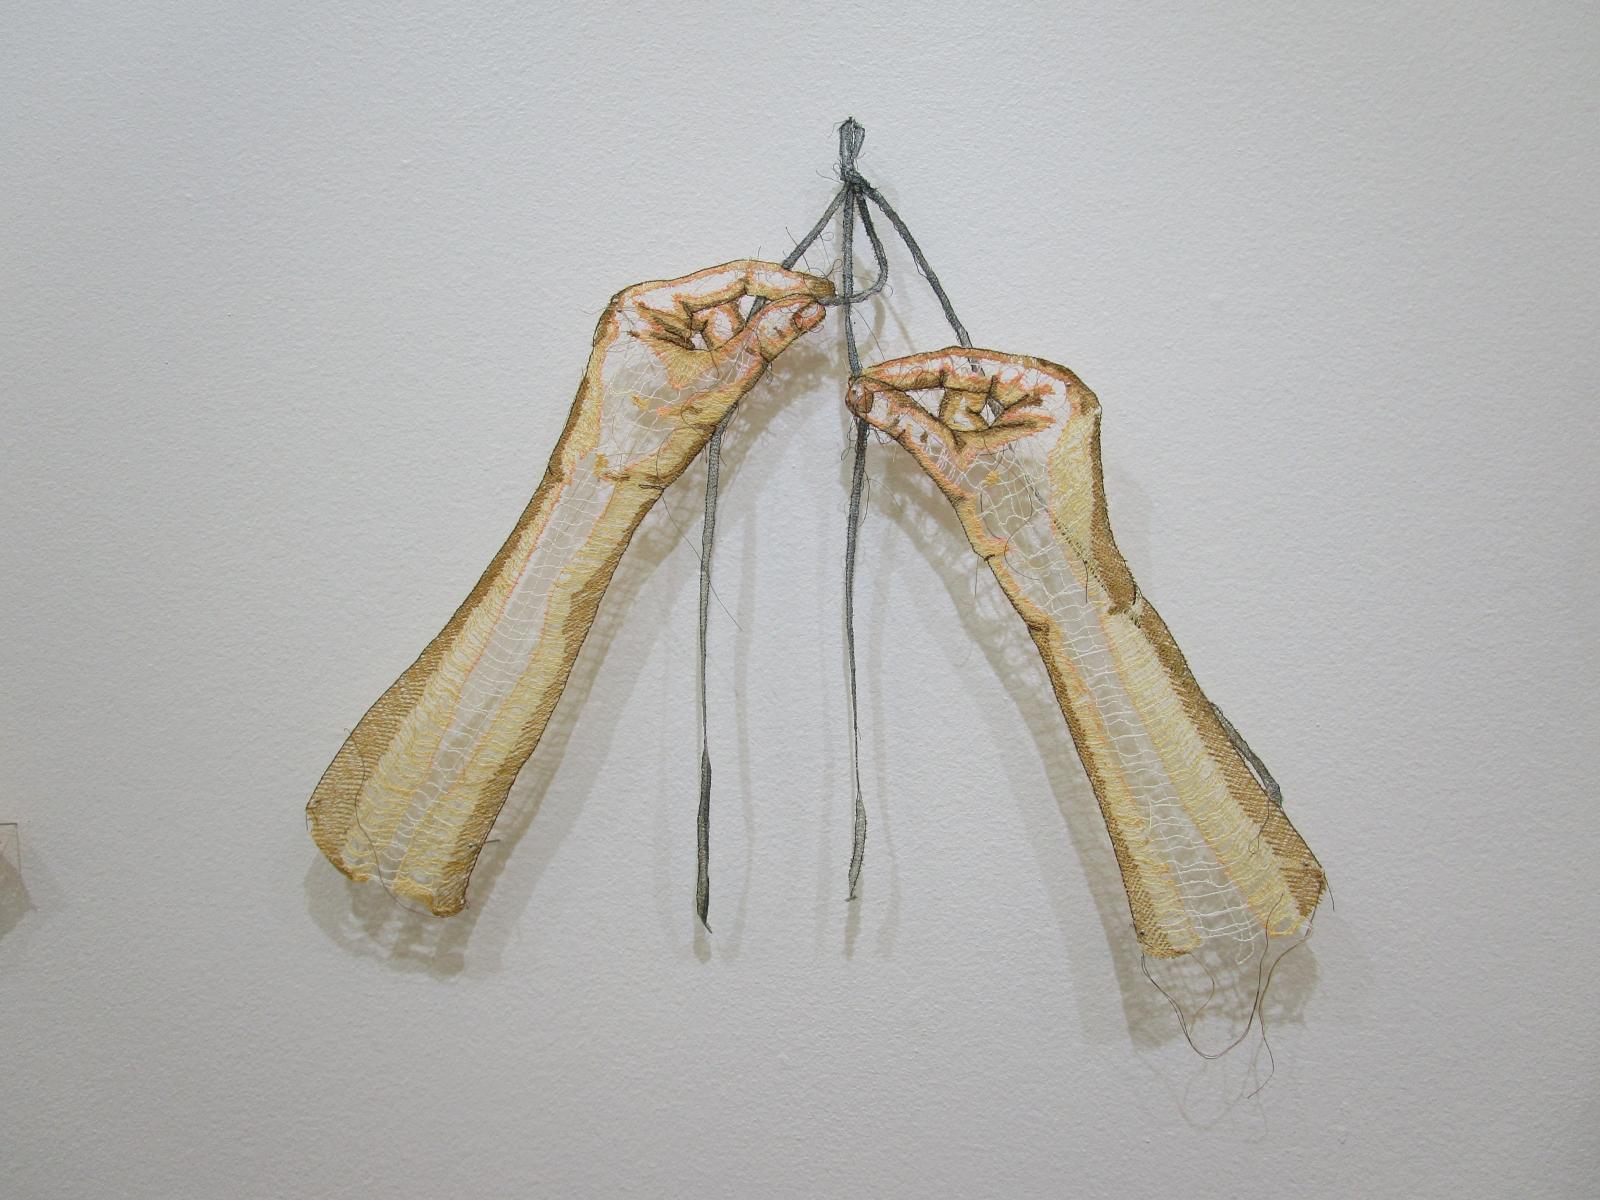 Hands by Amanda McCavour